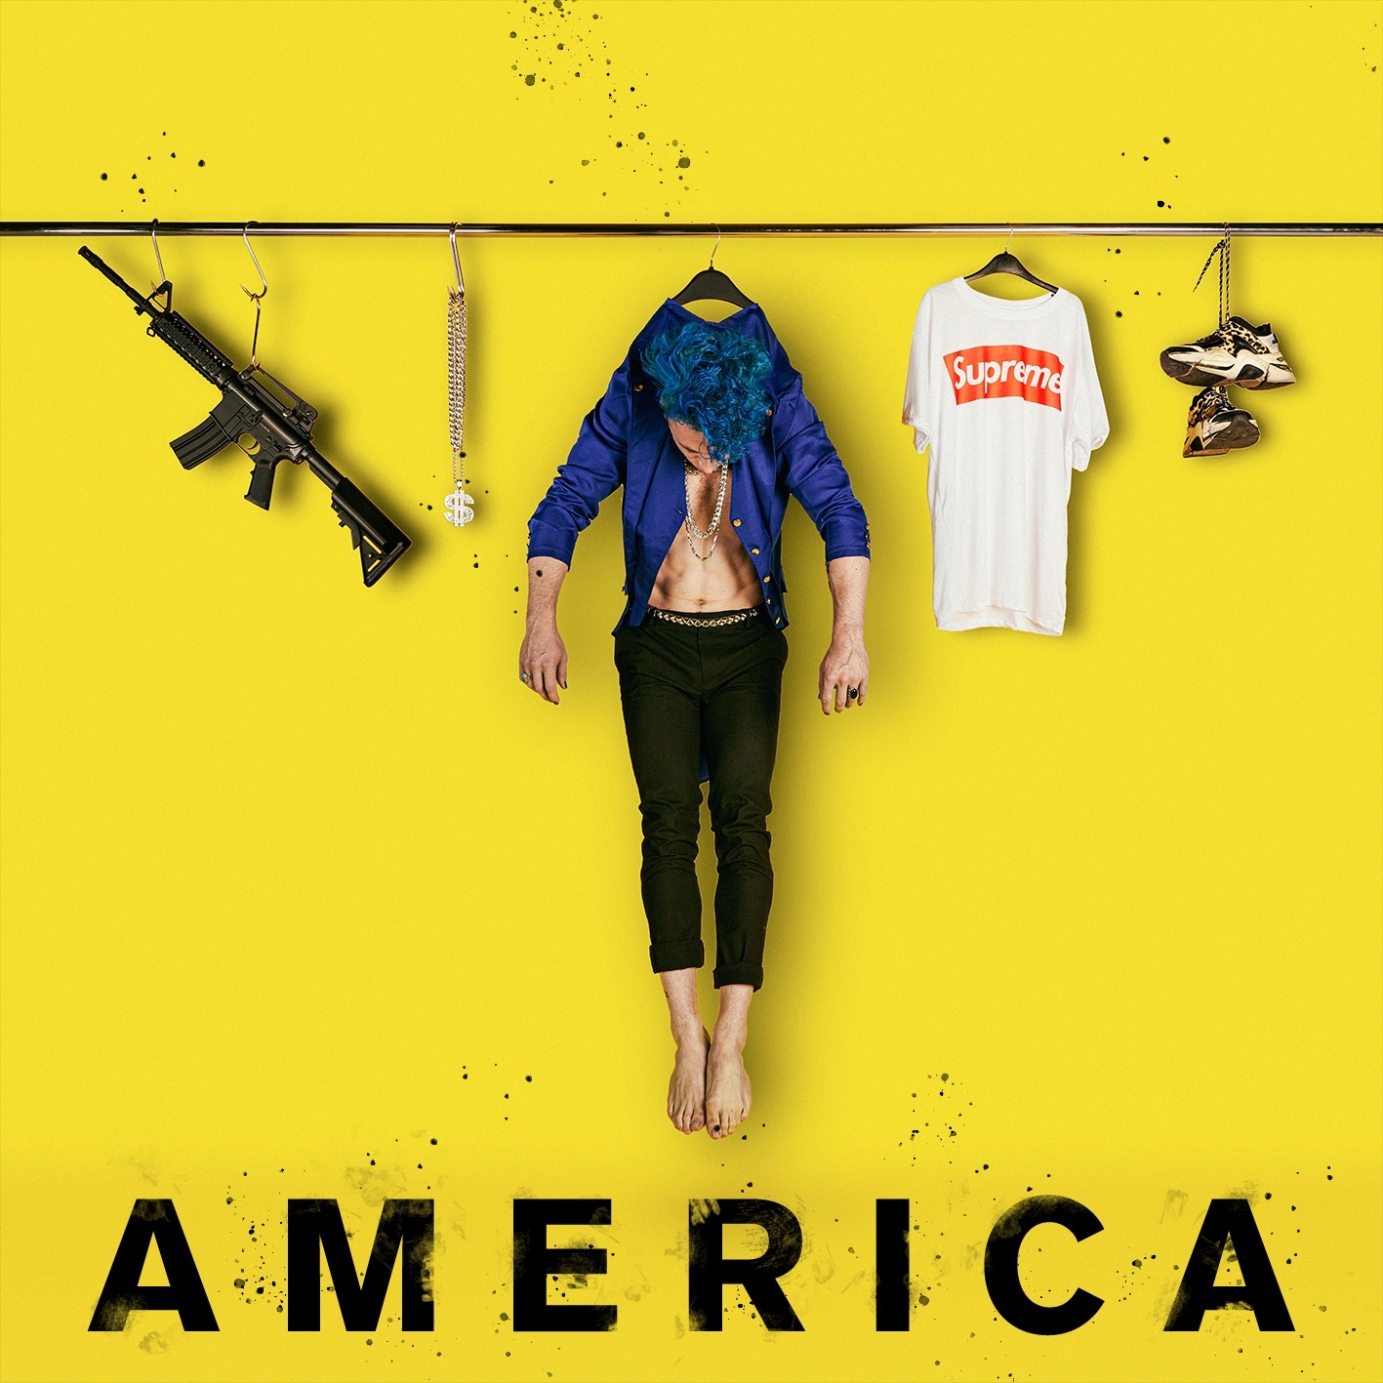 America Artwork and Press Shot for Moncrieff